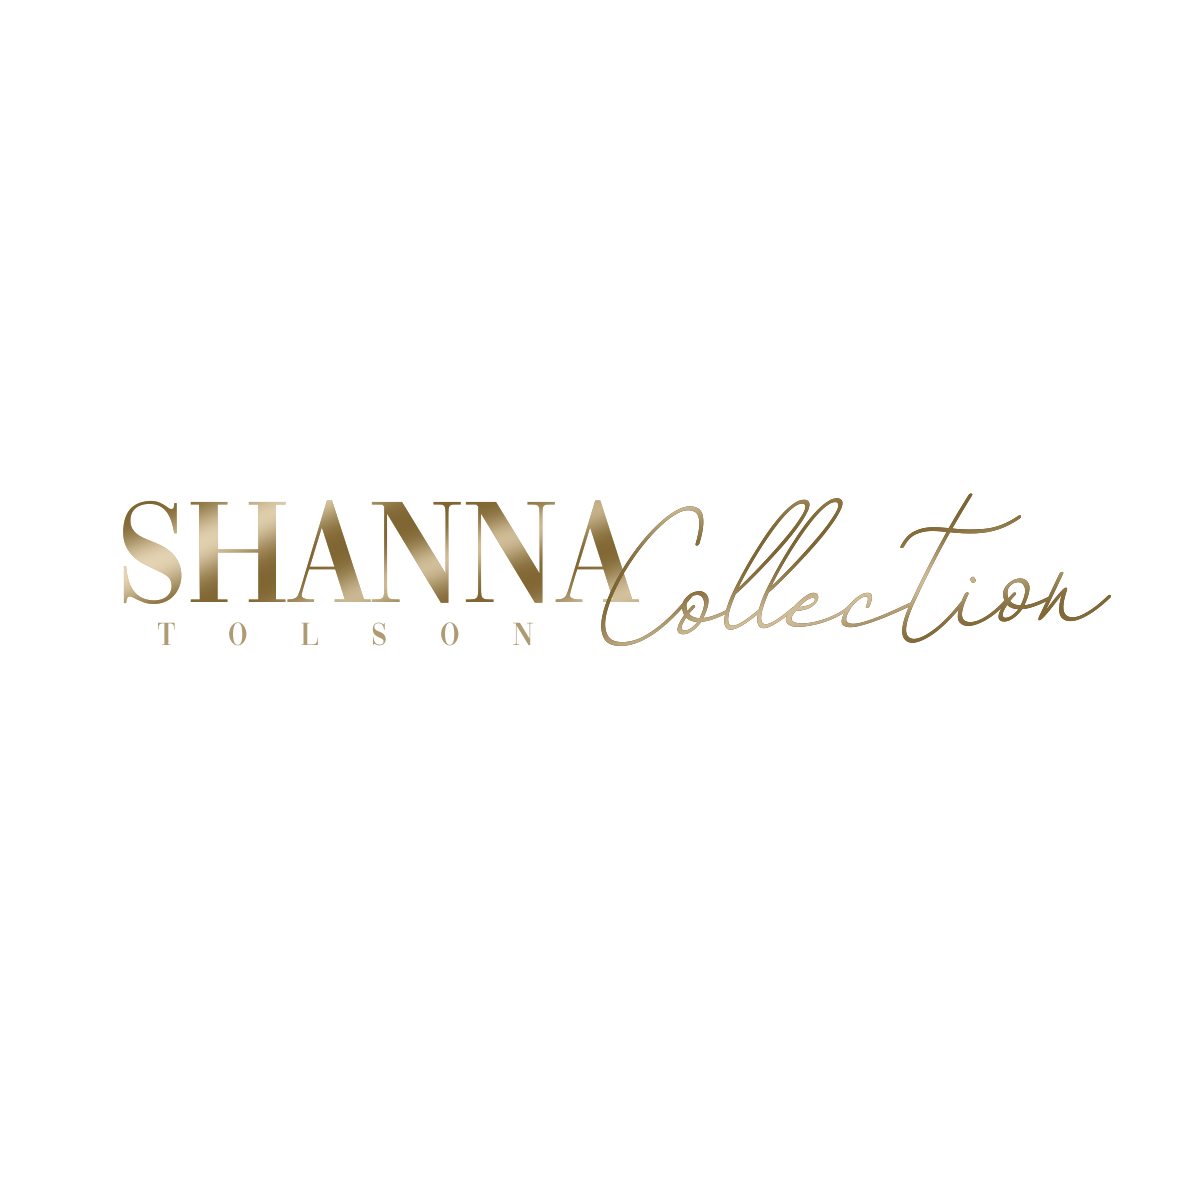 Shanna Tolson Collection